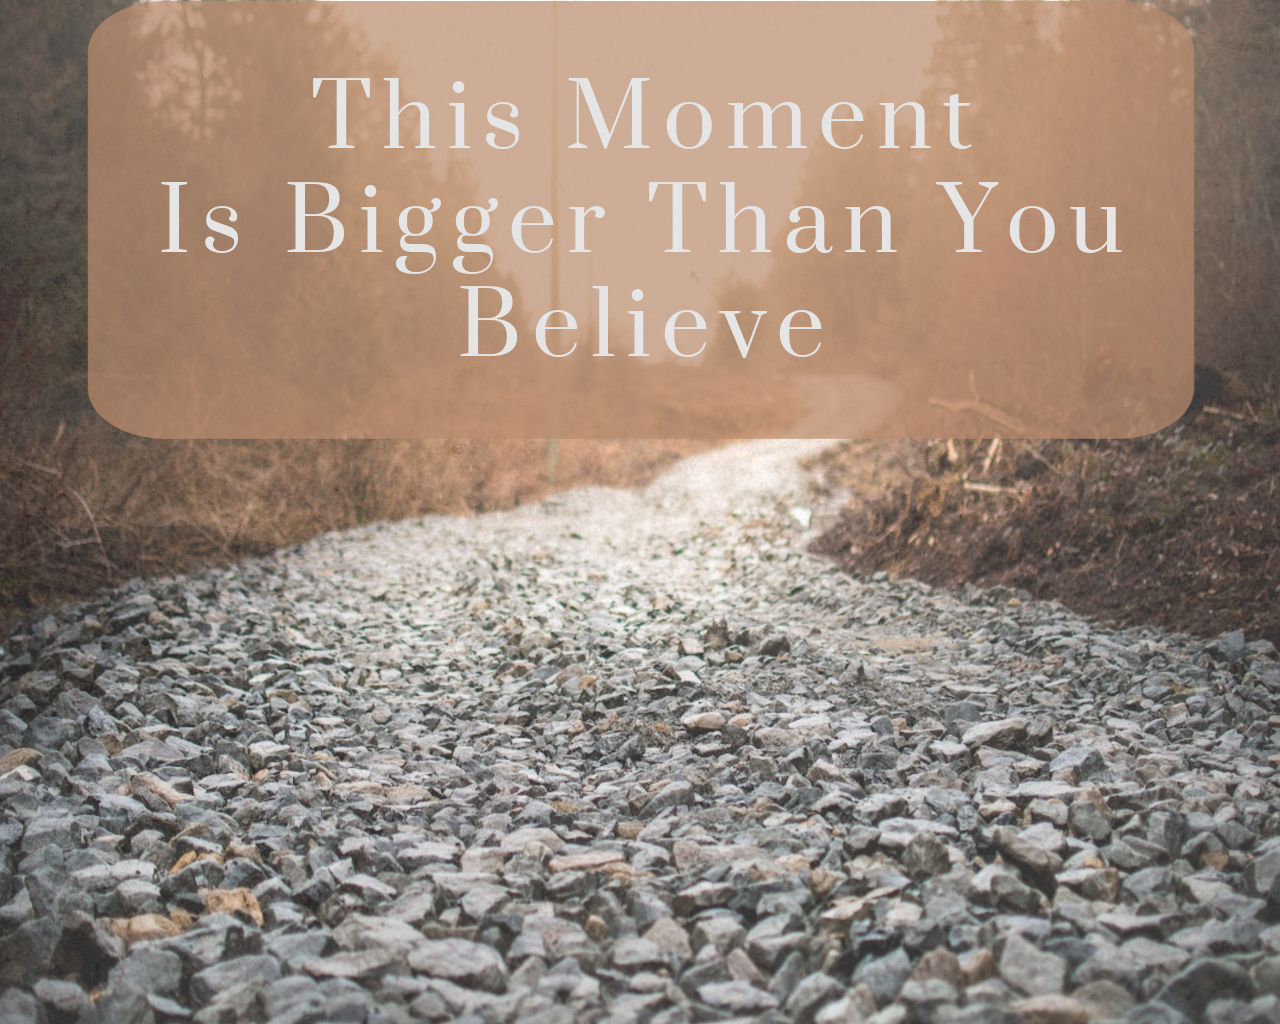 This Moment Is Bigger Than You Believe